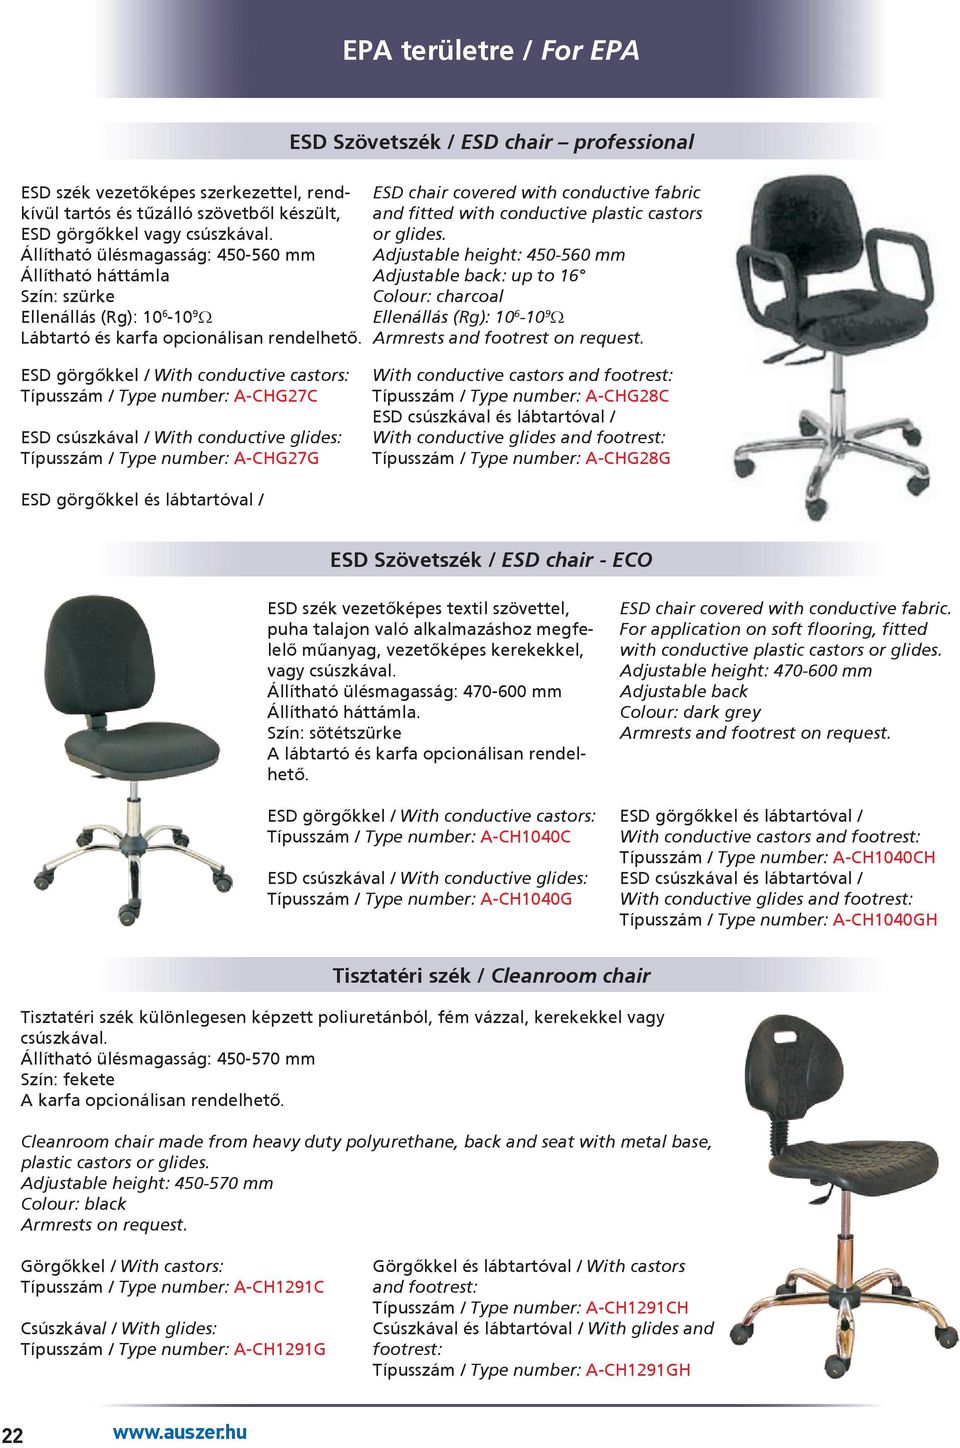 ESD Szövetszék / ESD chair professional ESD chair covered with conductive fabric and fitted with conductive plastic castors or glides.